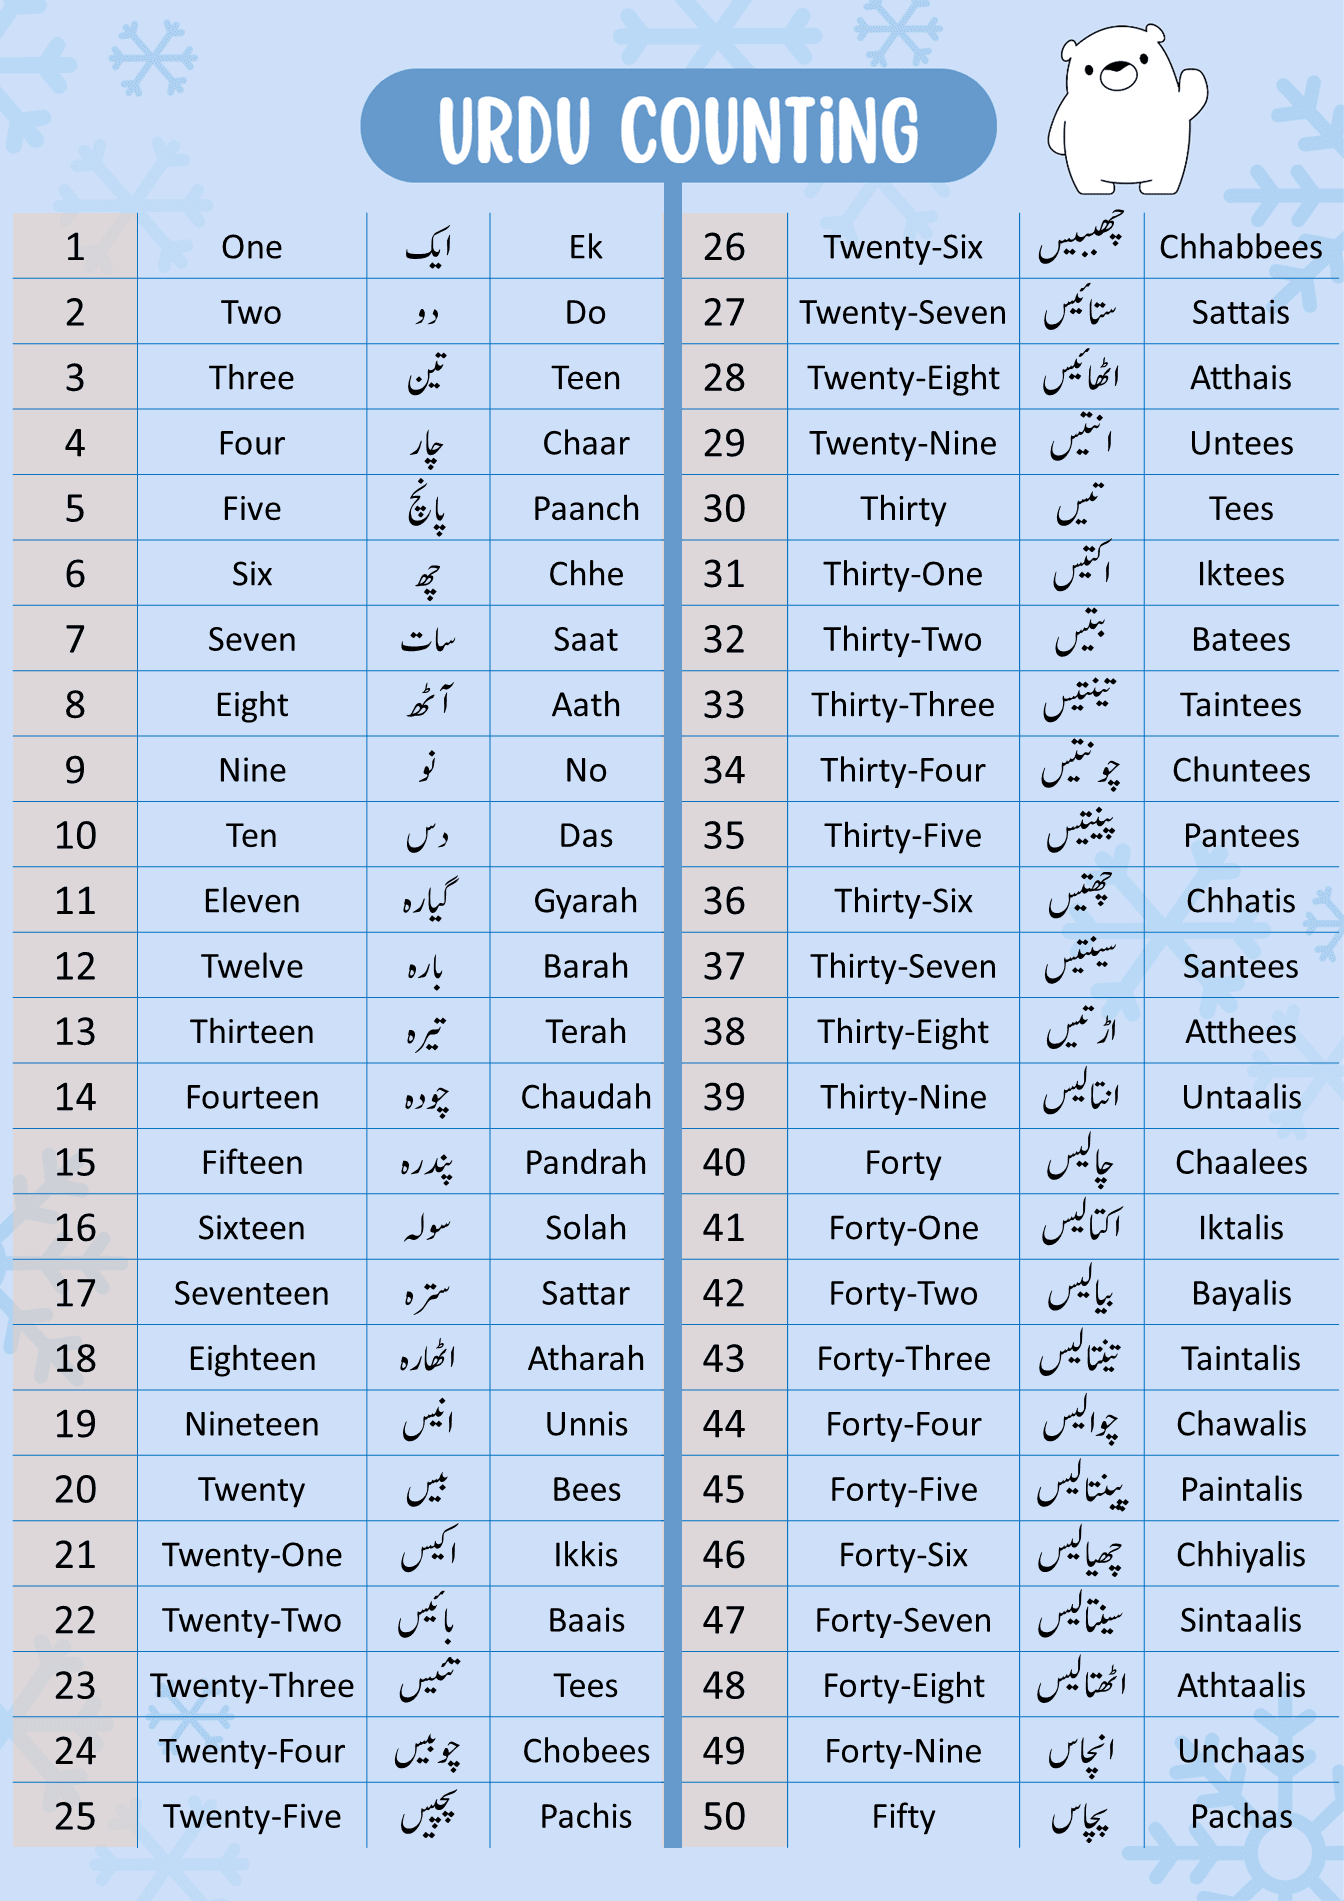 Urdu Counting 1 to 50.